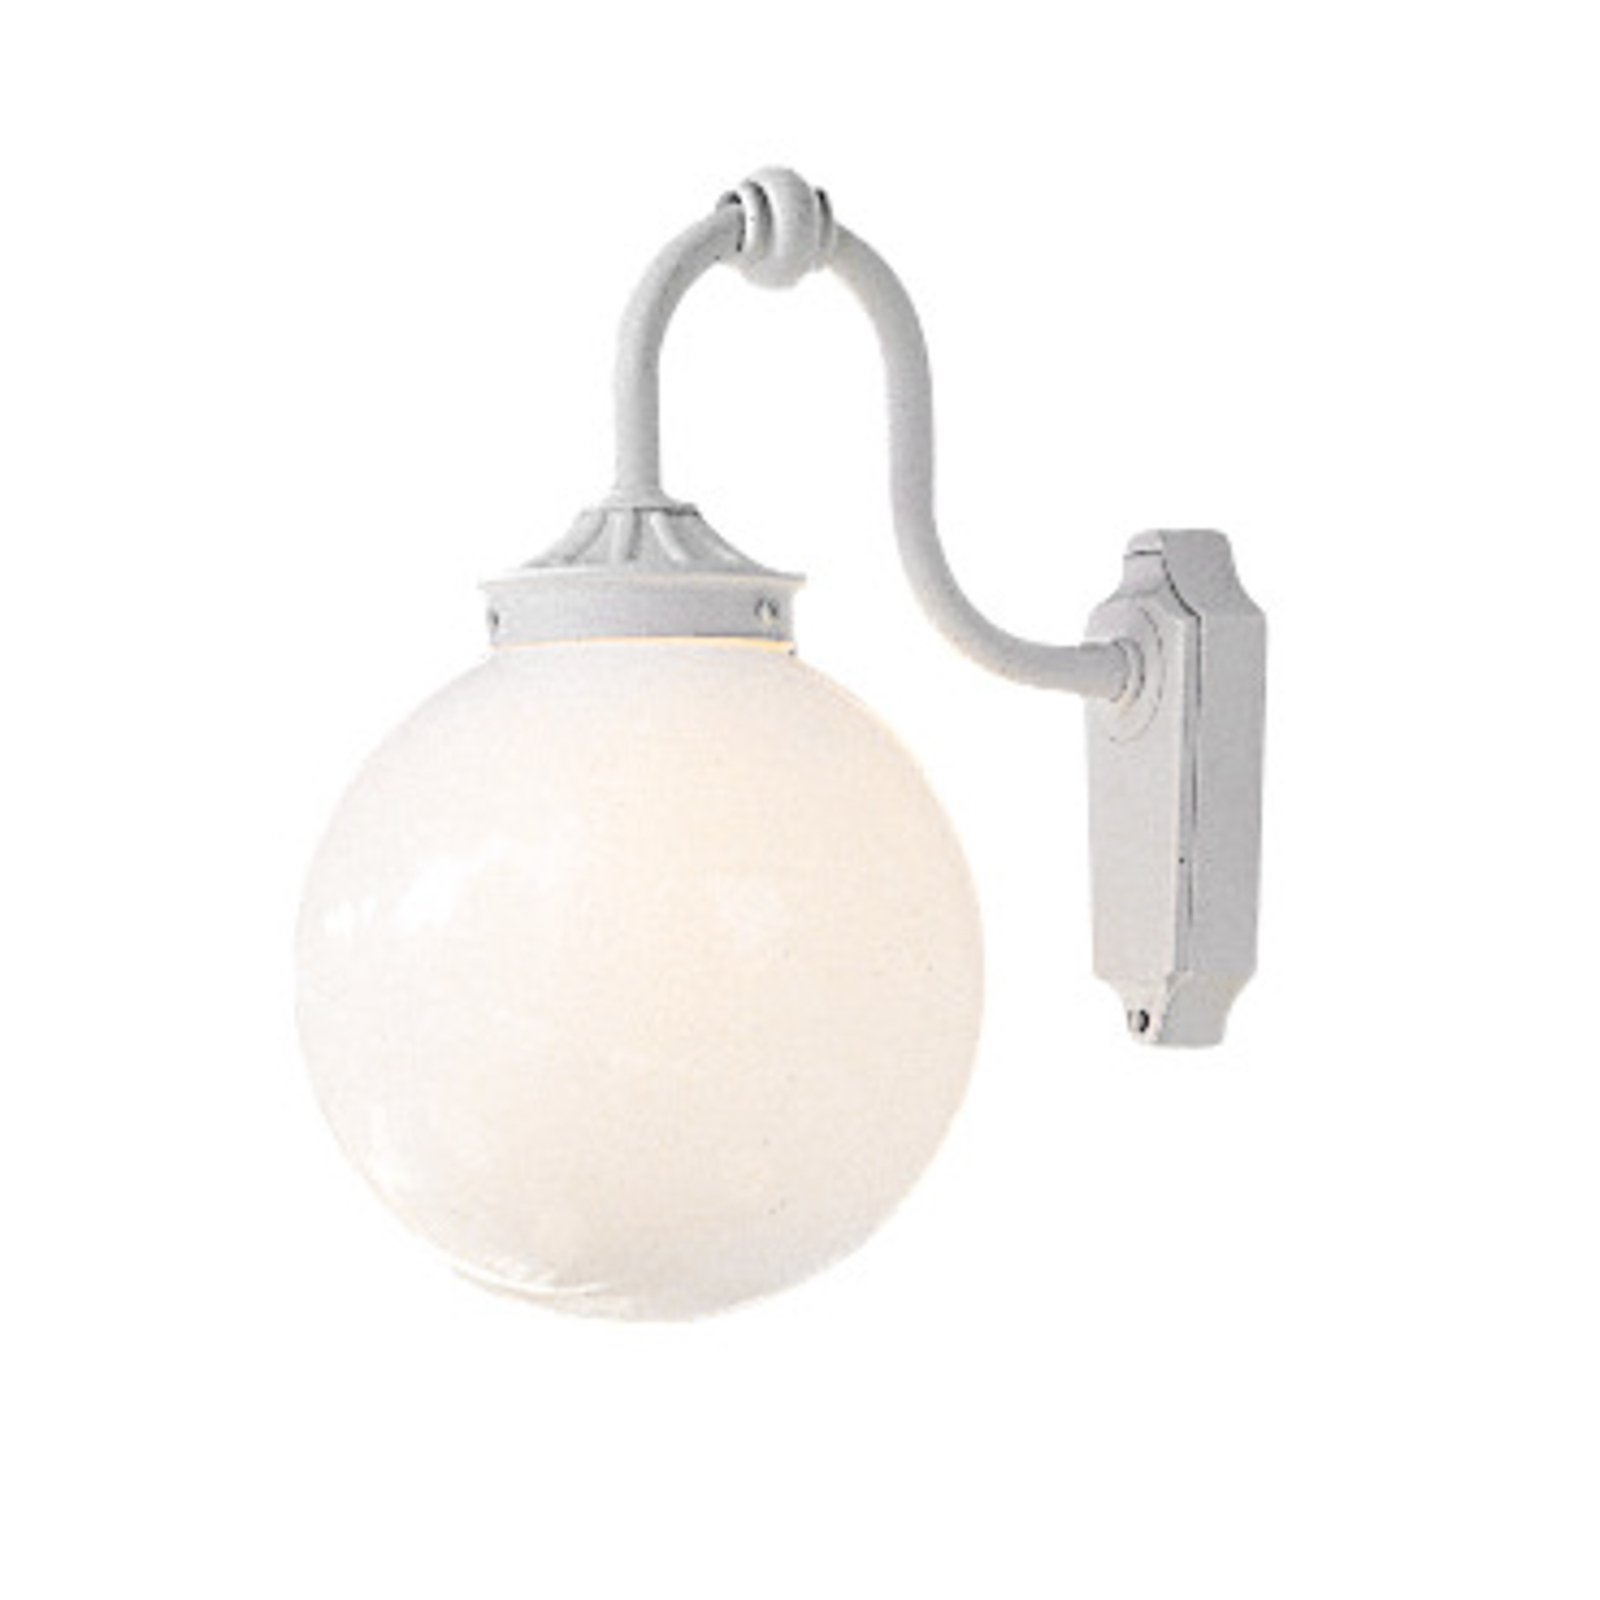 Arcturus outdoor wall light, spherical lampshade